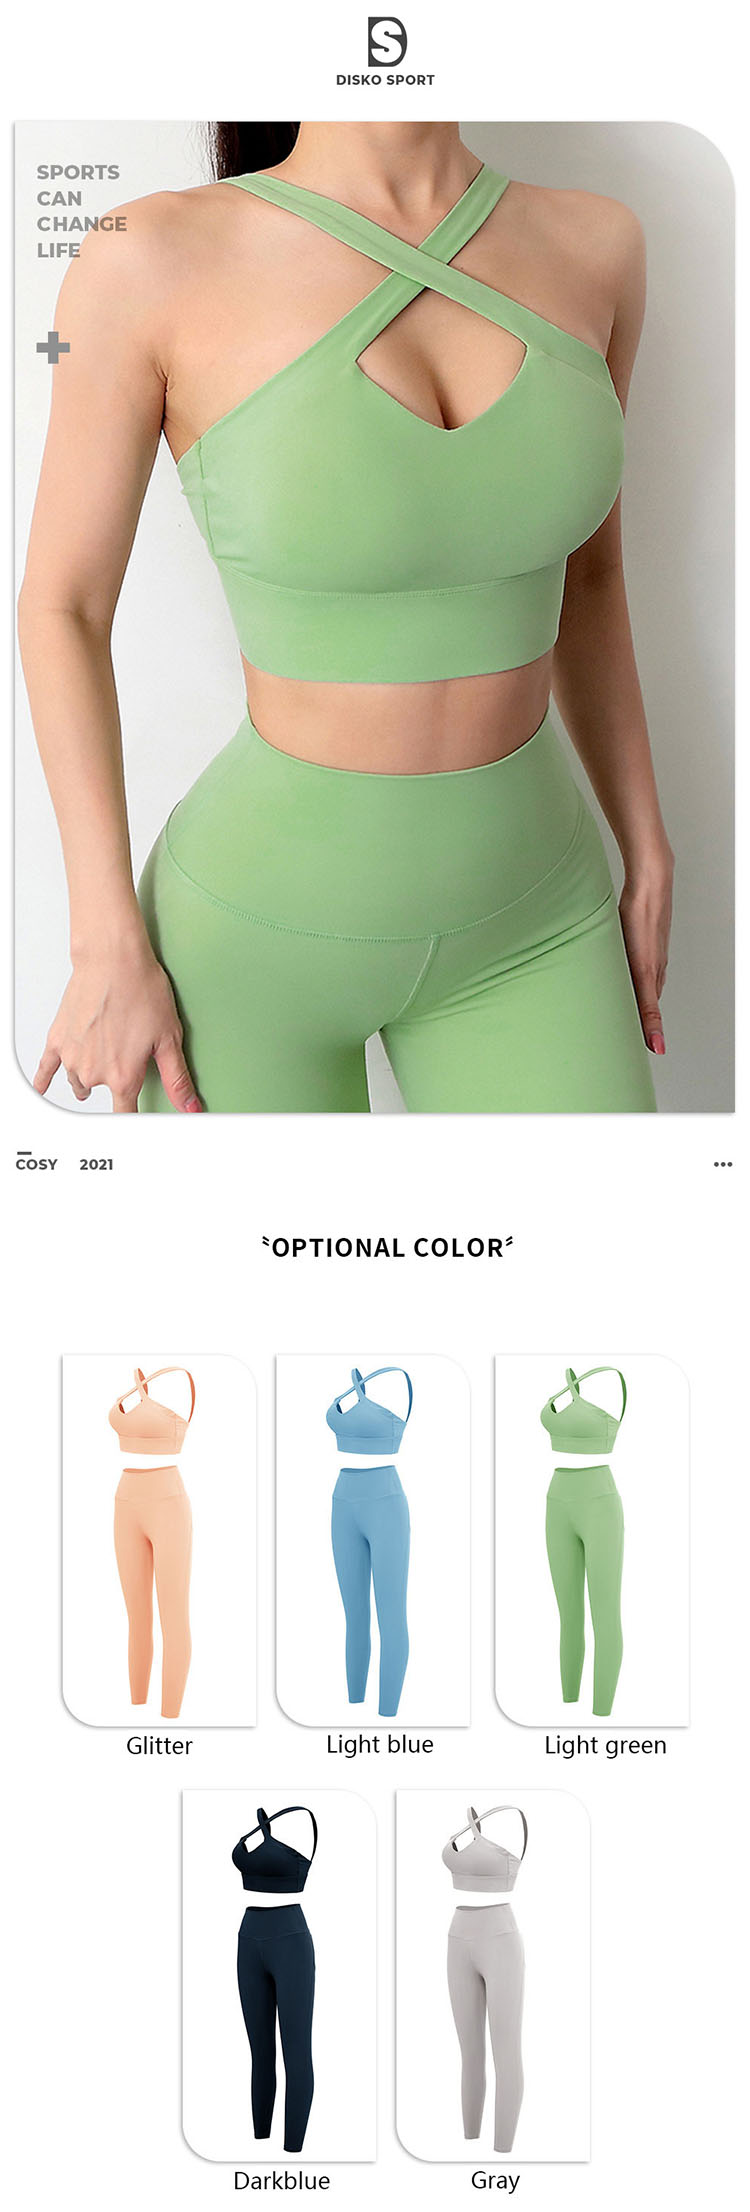 Asymmetrically designed loose workout pants womens can emphasize